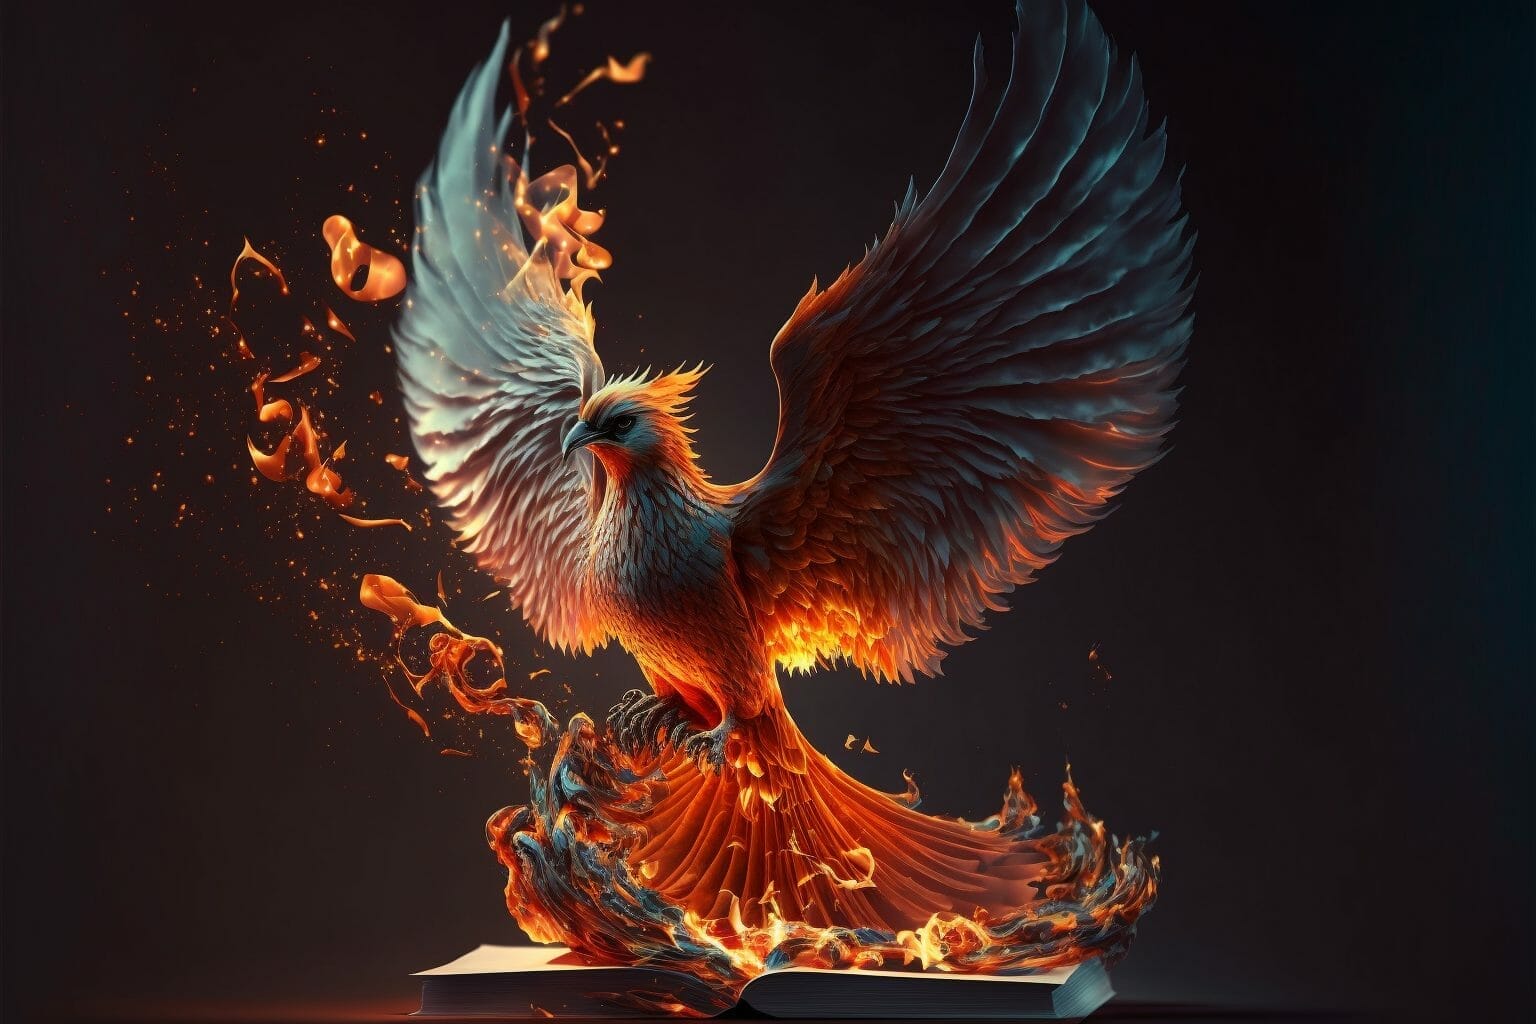 Project Phoenix rising from flames of old license